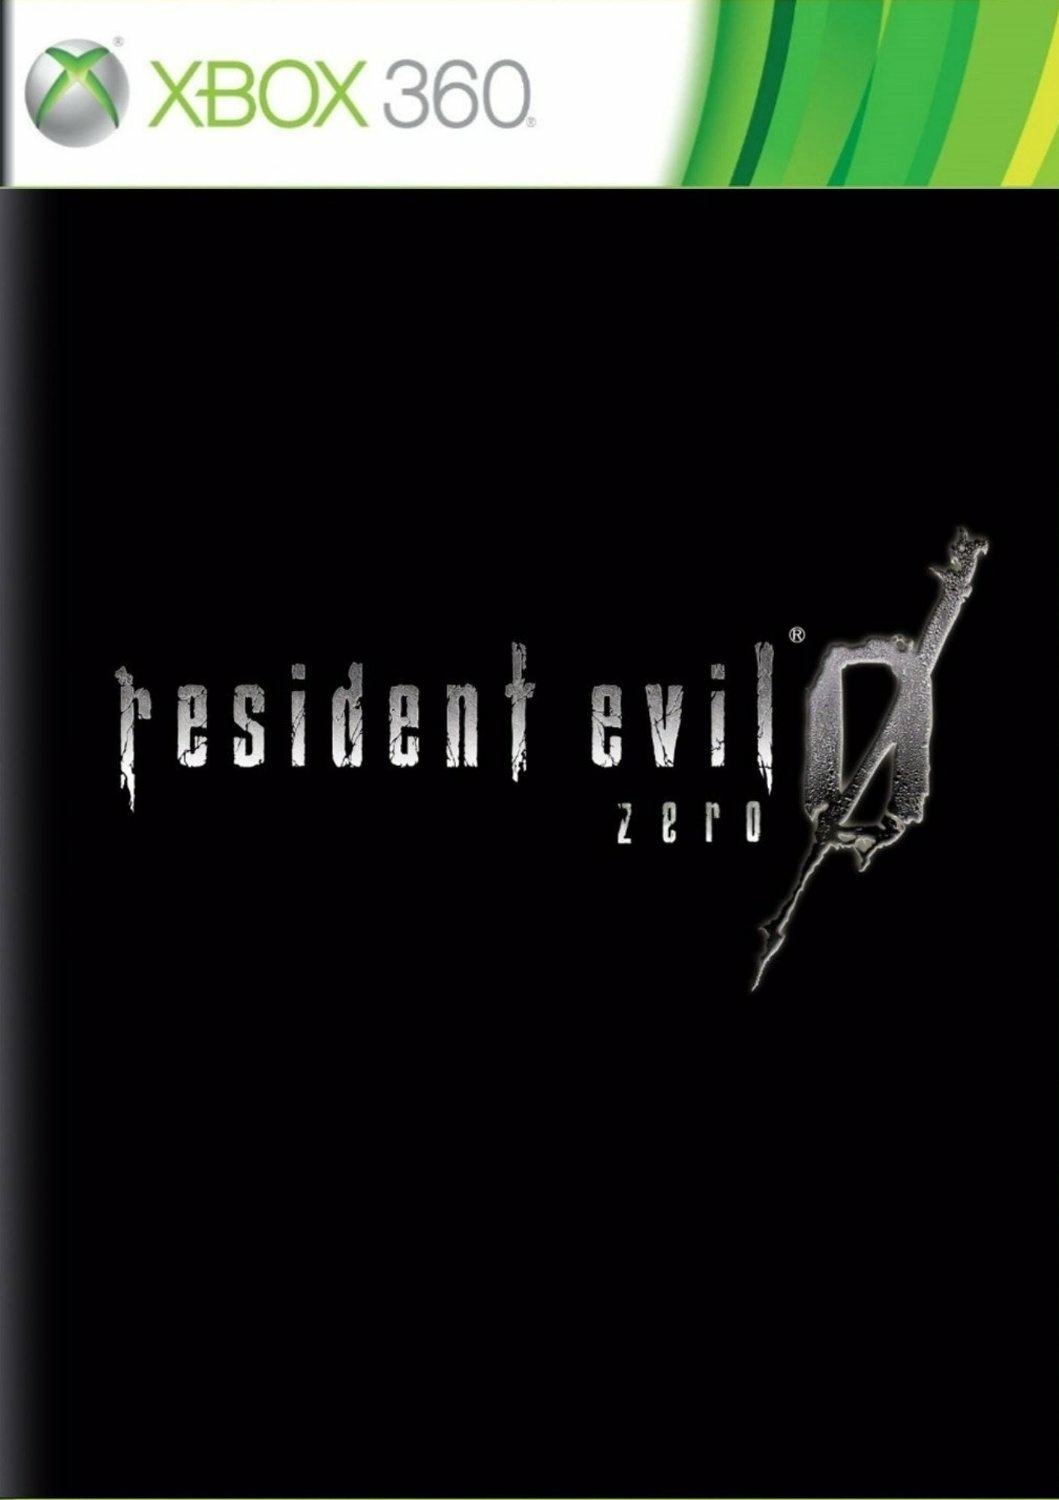 download xbox 360 resident evil 2 for free